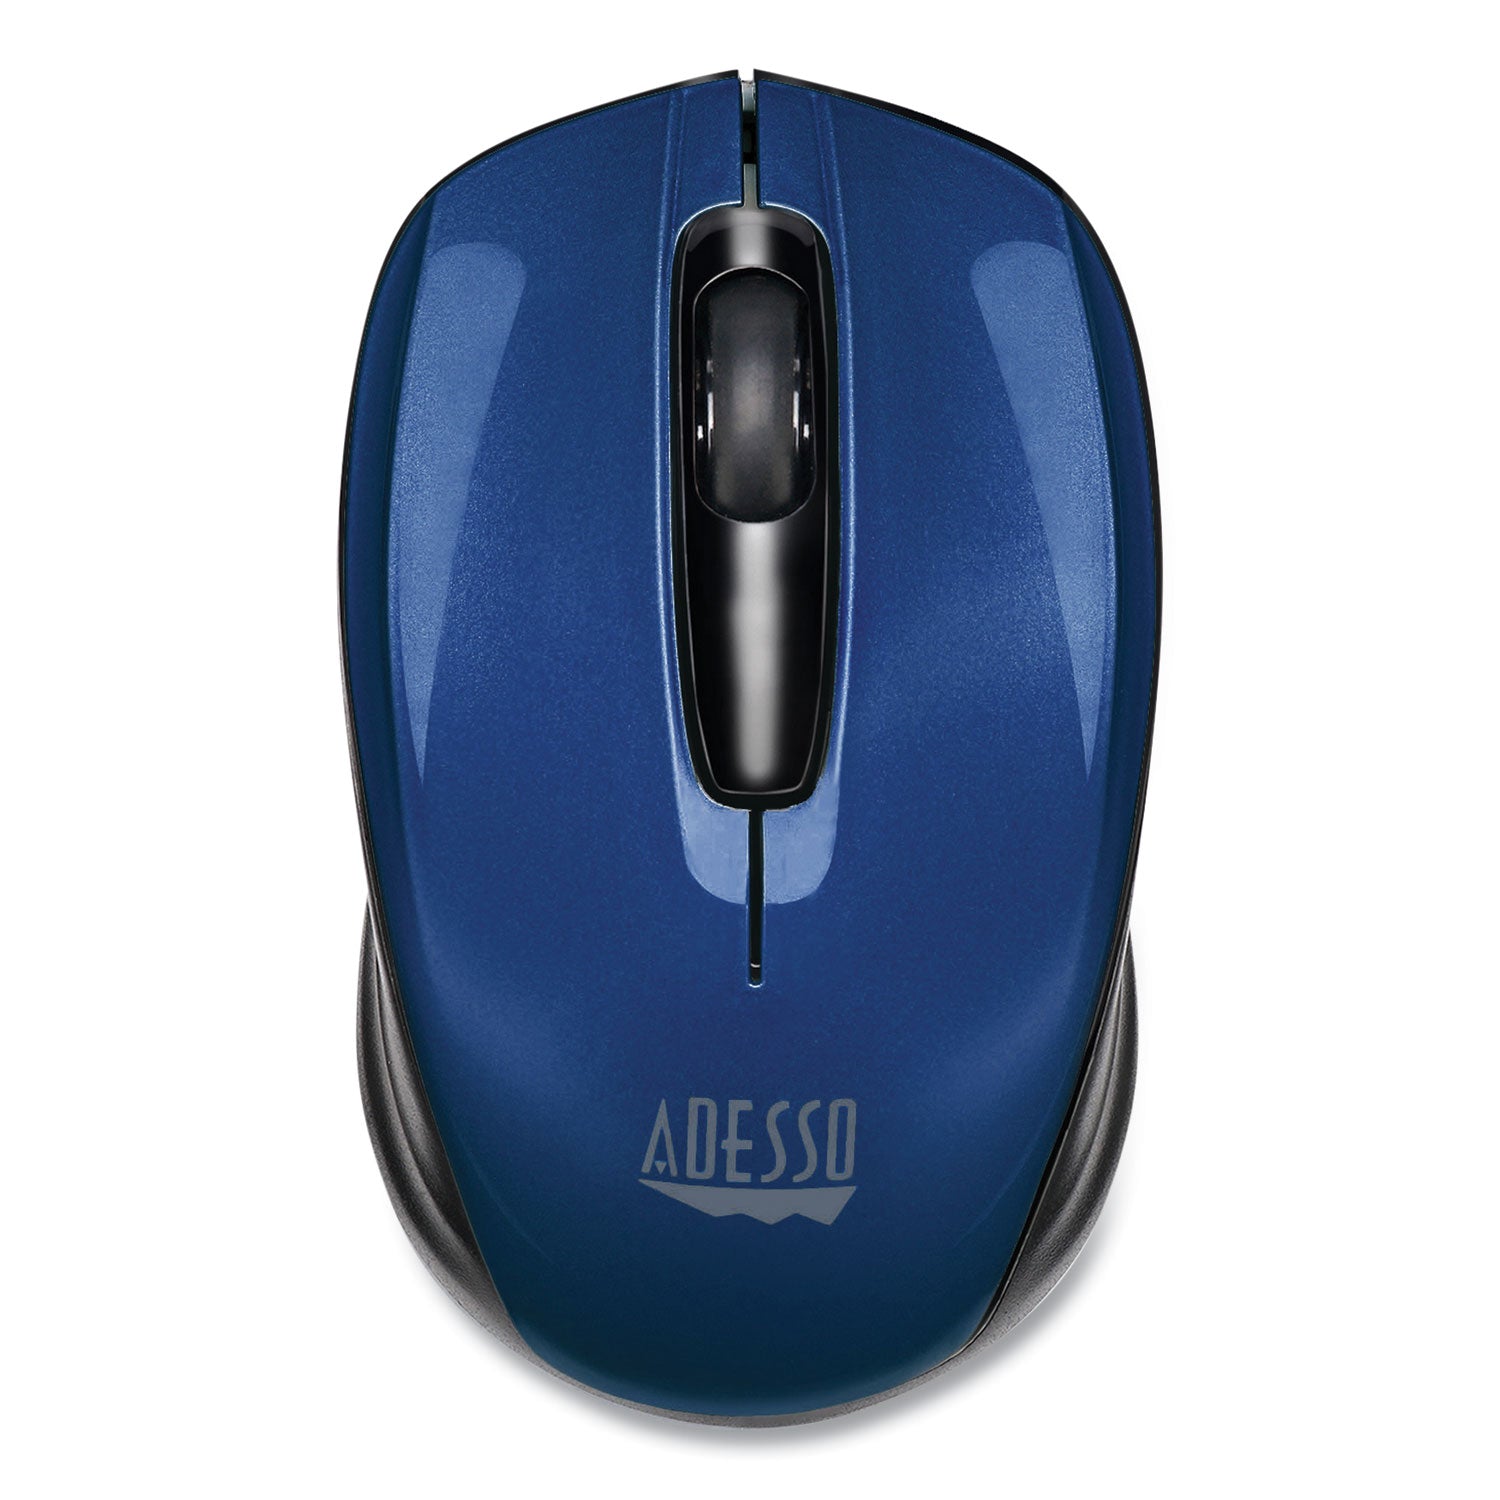 imouse-s50-wireless-mini-mouse-24-ghz-frequency-33-ft-wireless-range-left-right-hand-use-blue_adeimouses50l - 1